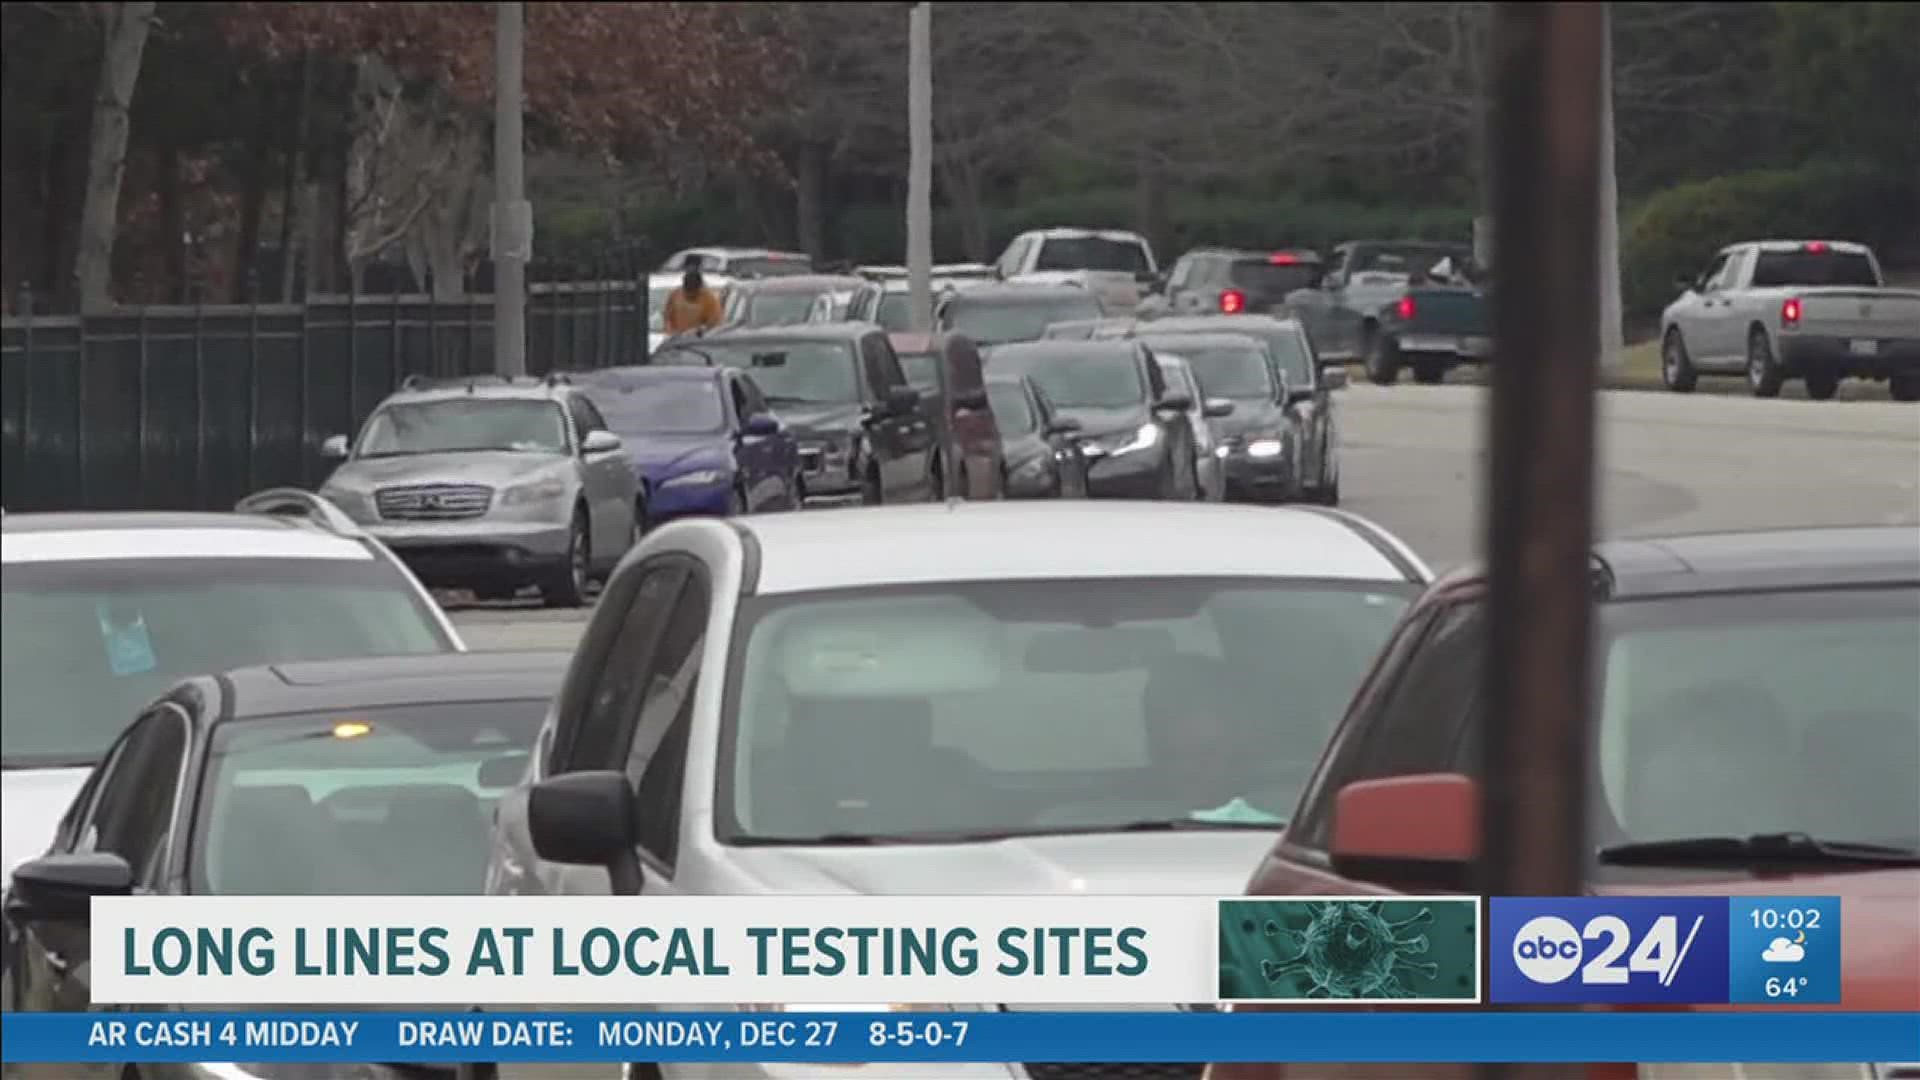 Poplar Healthcare saw a large line of people waiting to get COVID testing in Southwind Monday.